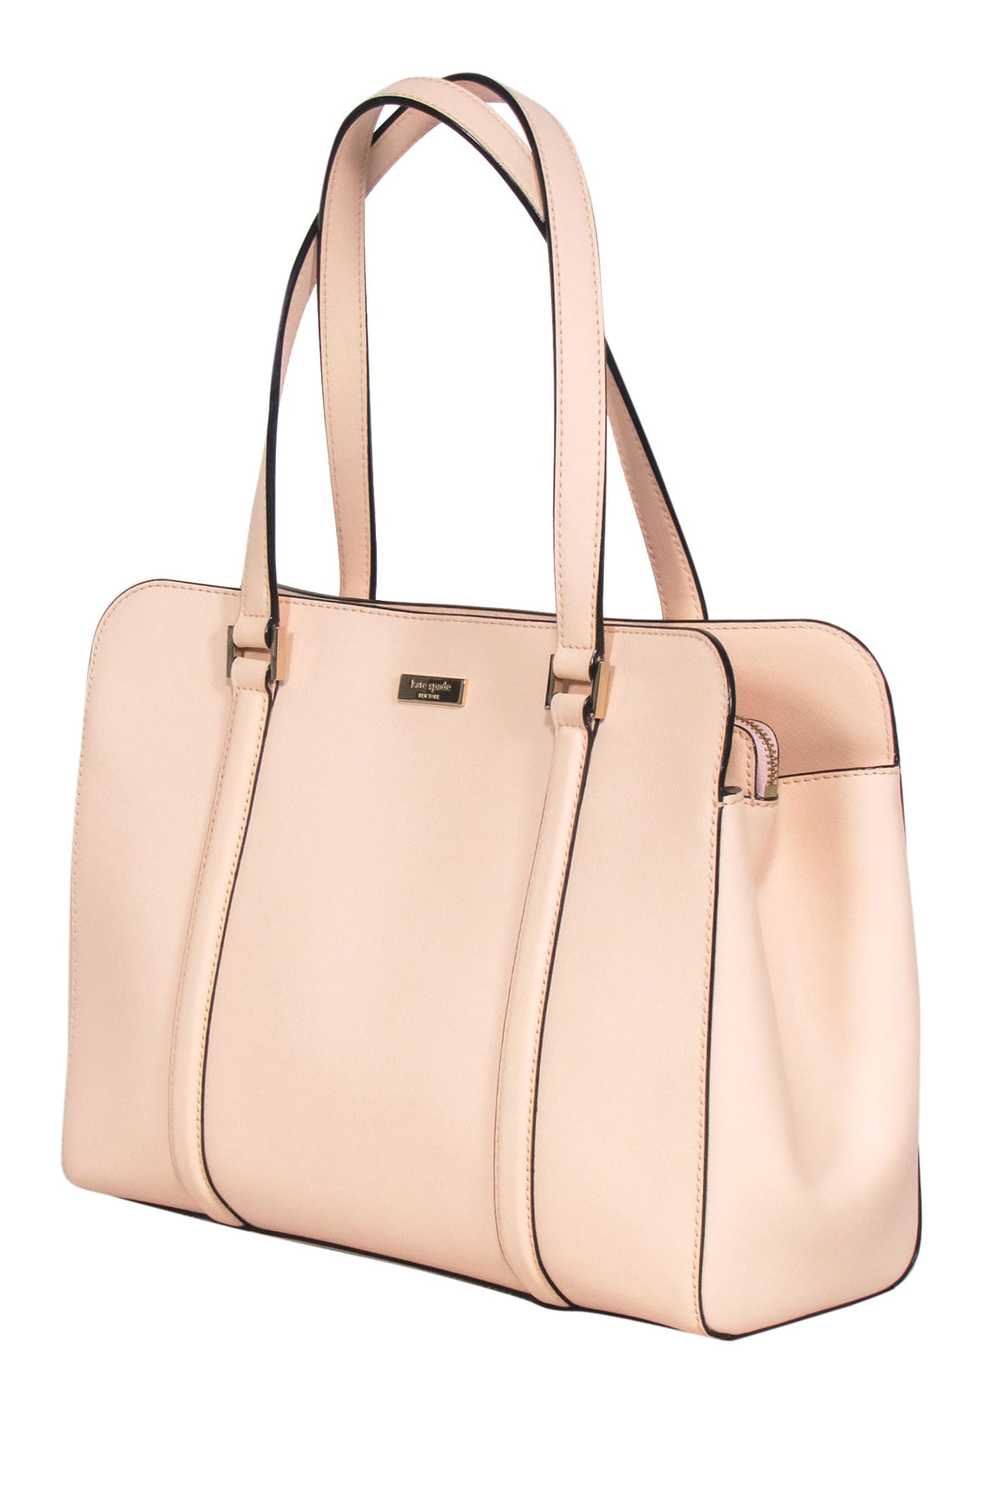 Kate Spade - Peach Pink Textured Leather "Miles" … - image 2